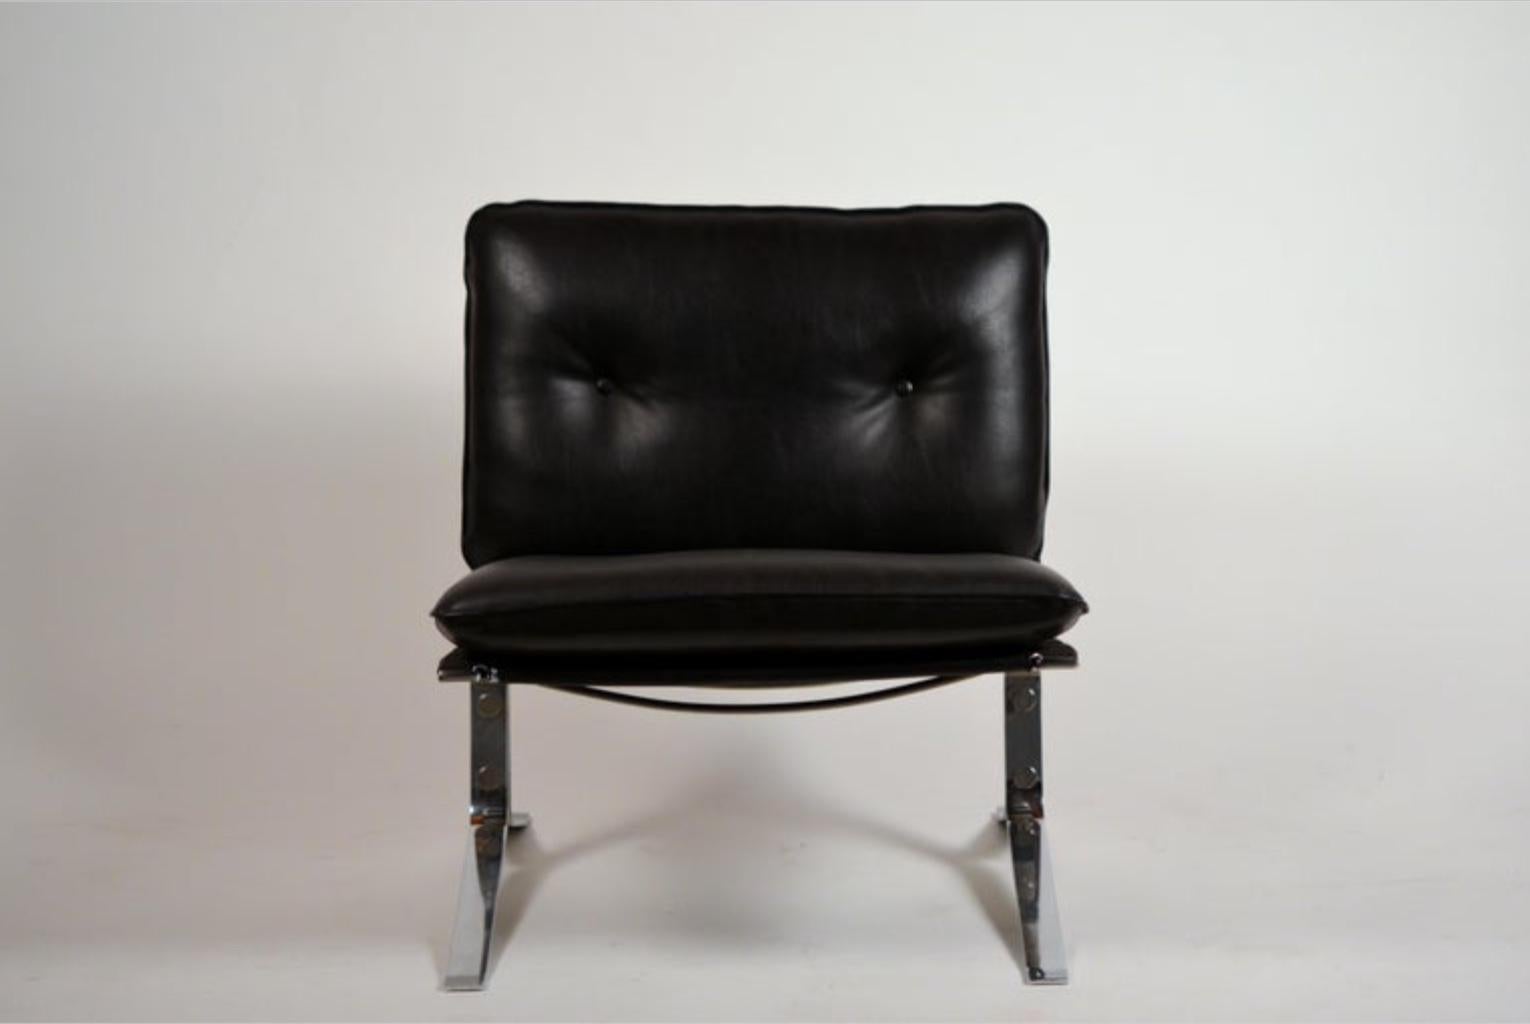 Rare Pair of Original 'Joker' Lounge Chairs by Olivier Mourgue for Airborne For Sale 2